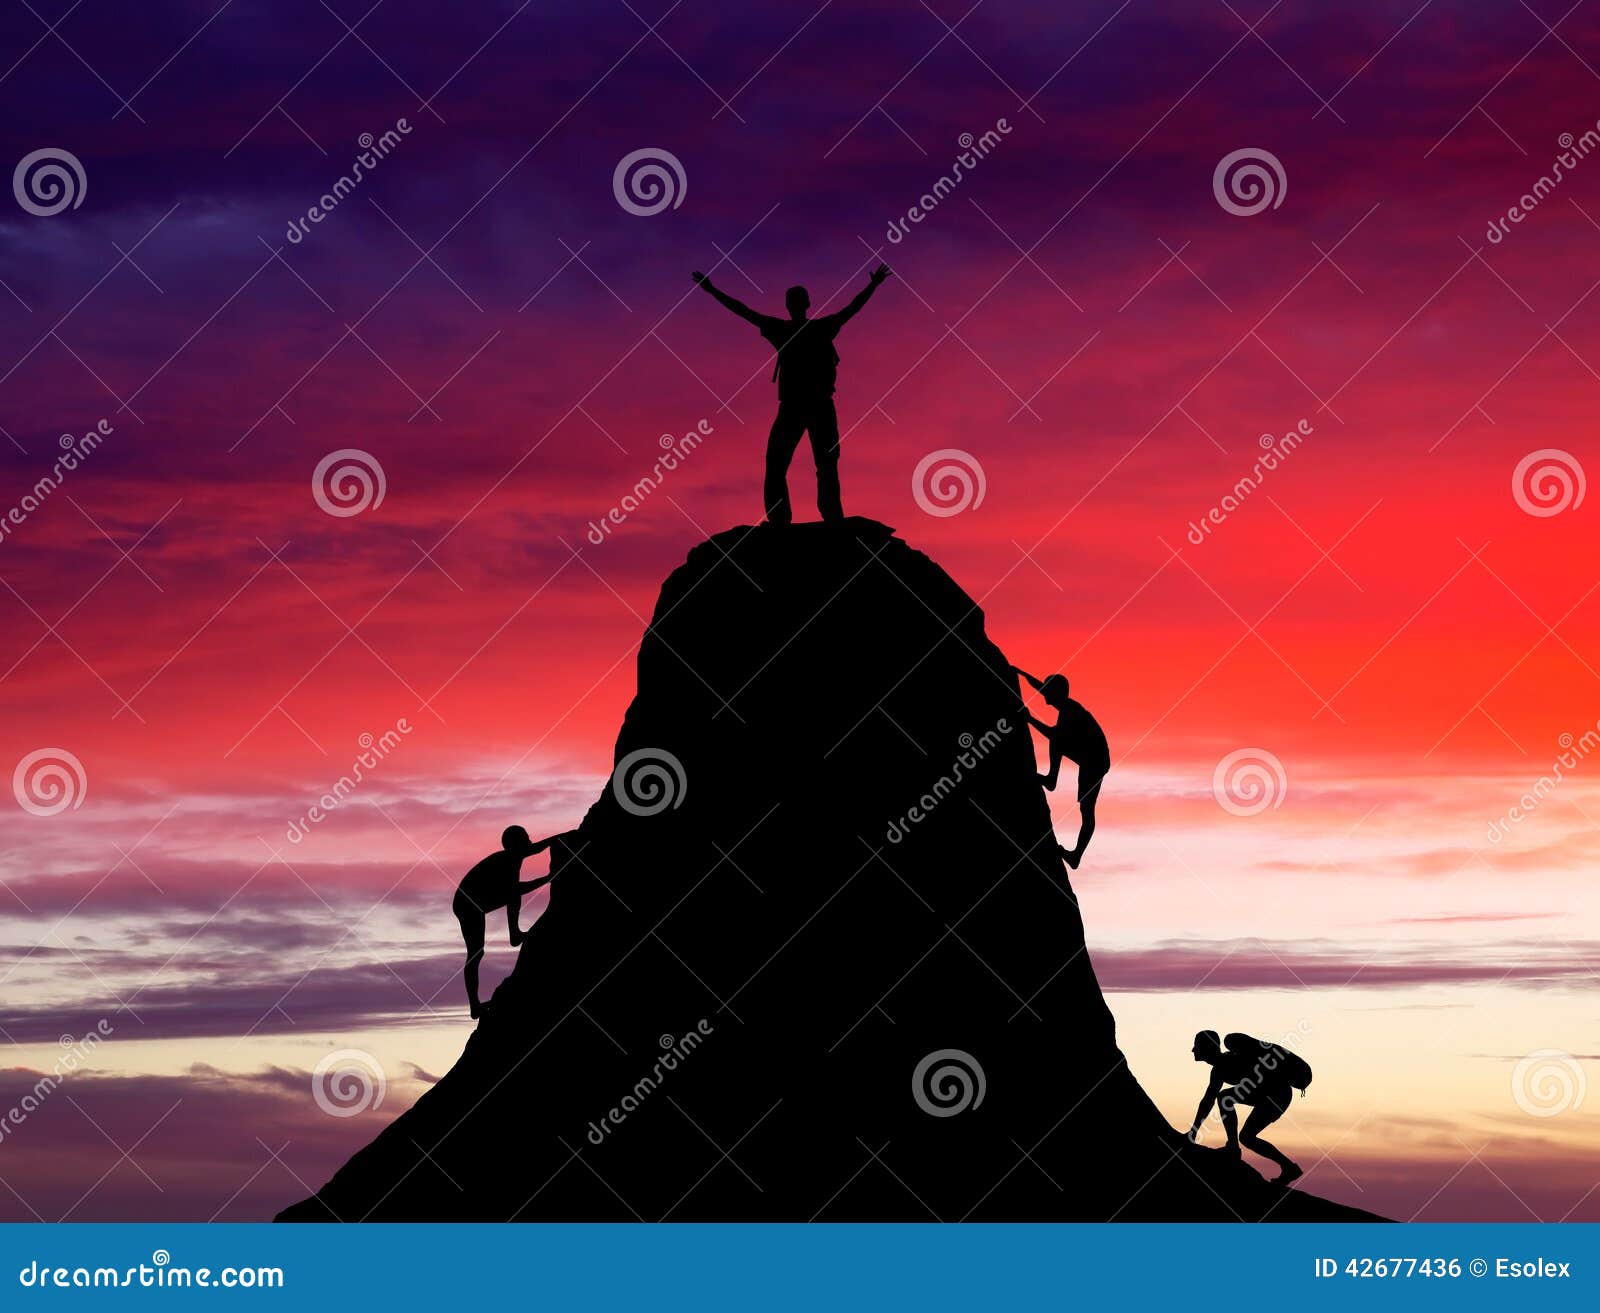 man on top of the mountain and the other people to climb up.